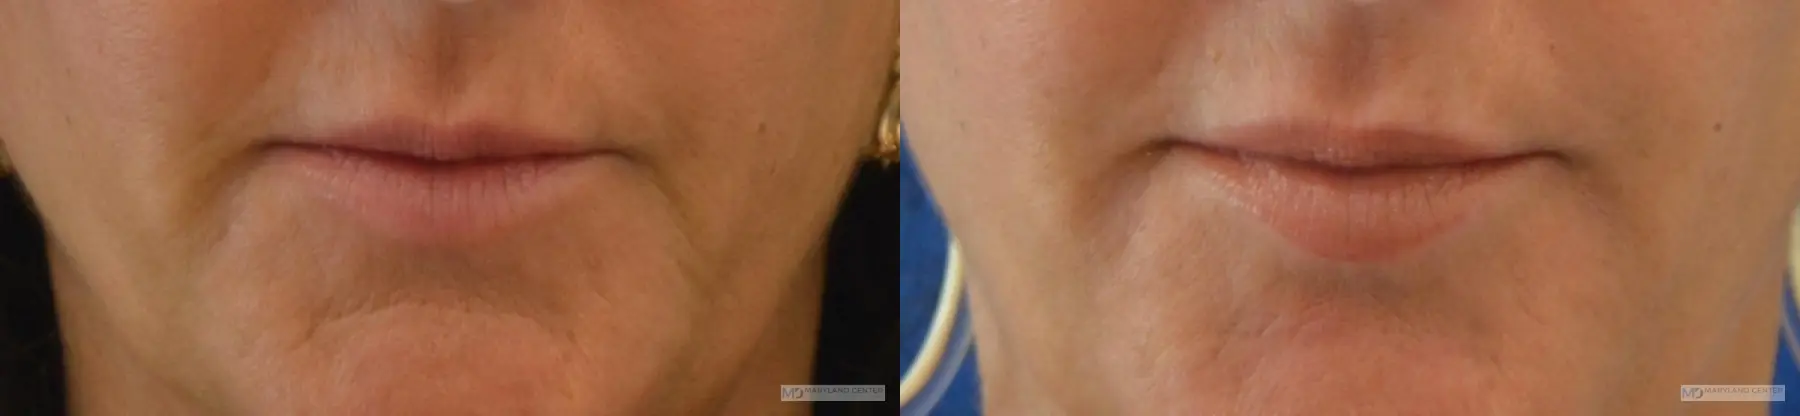 Injectables: Patient 3 - Before and After  